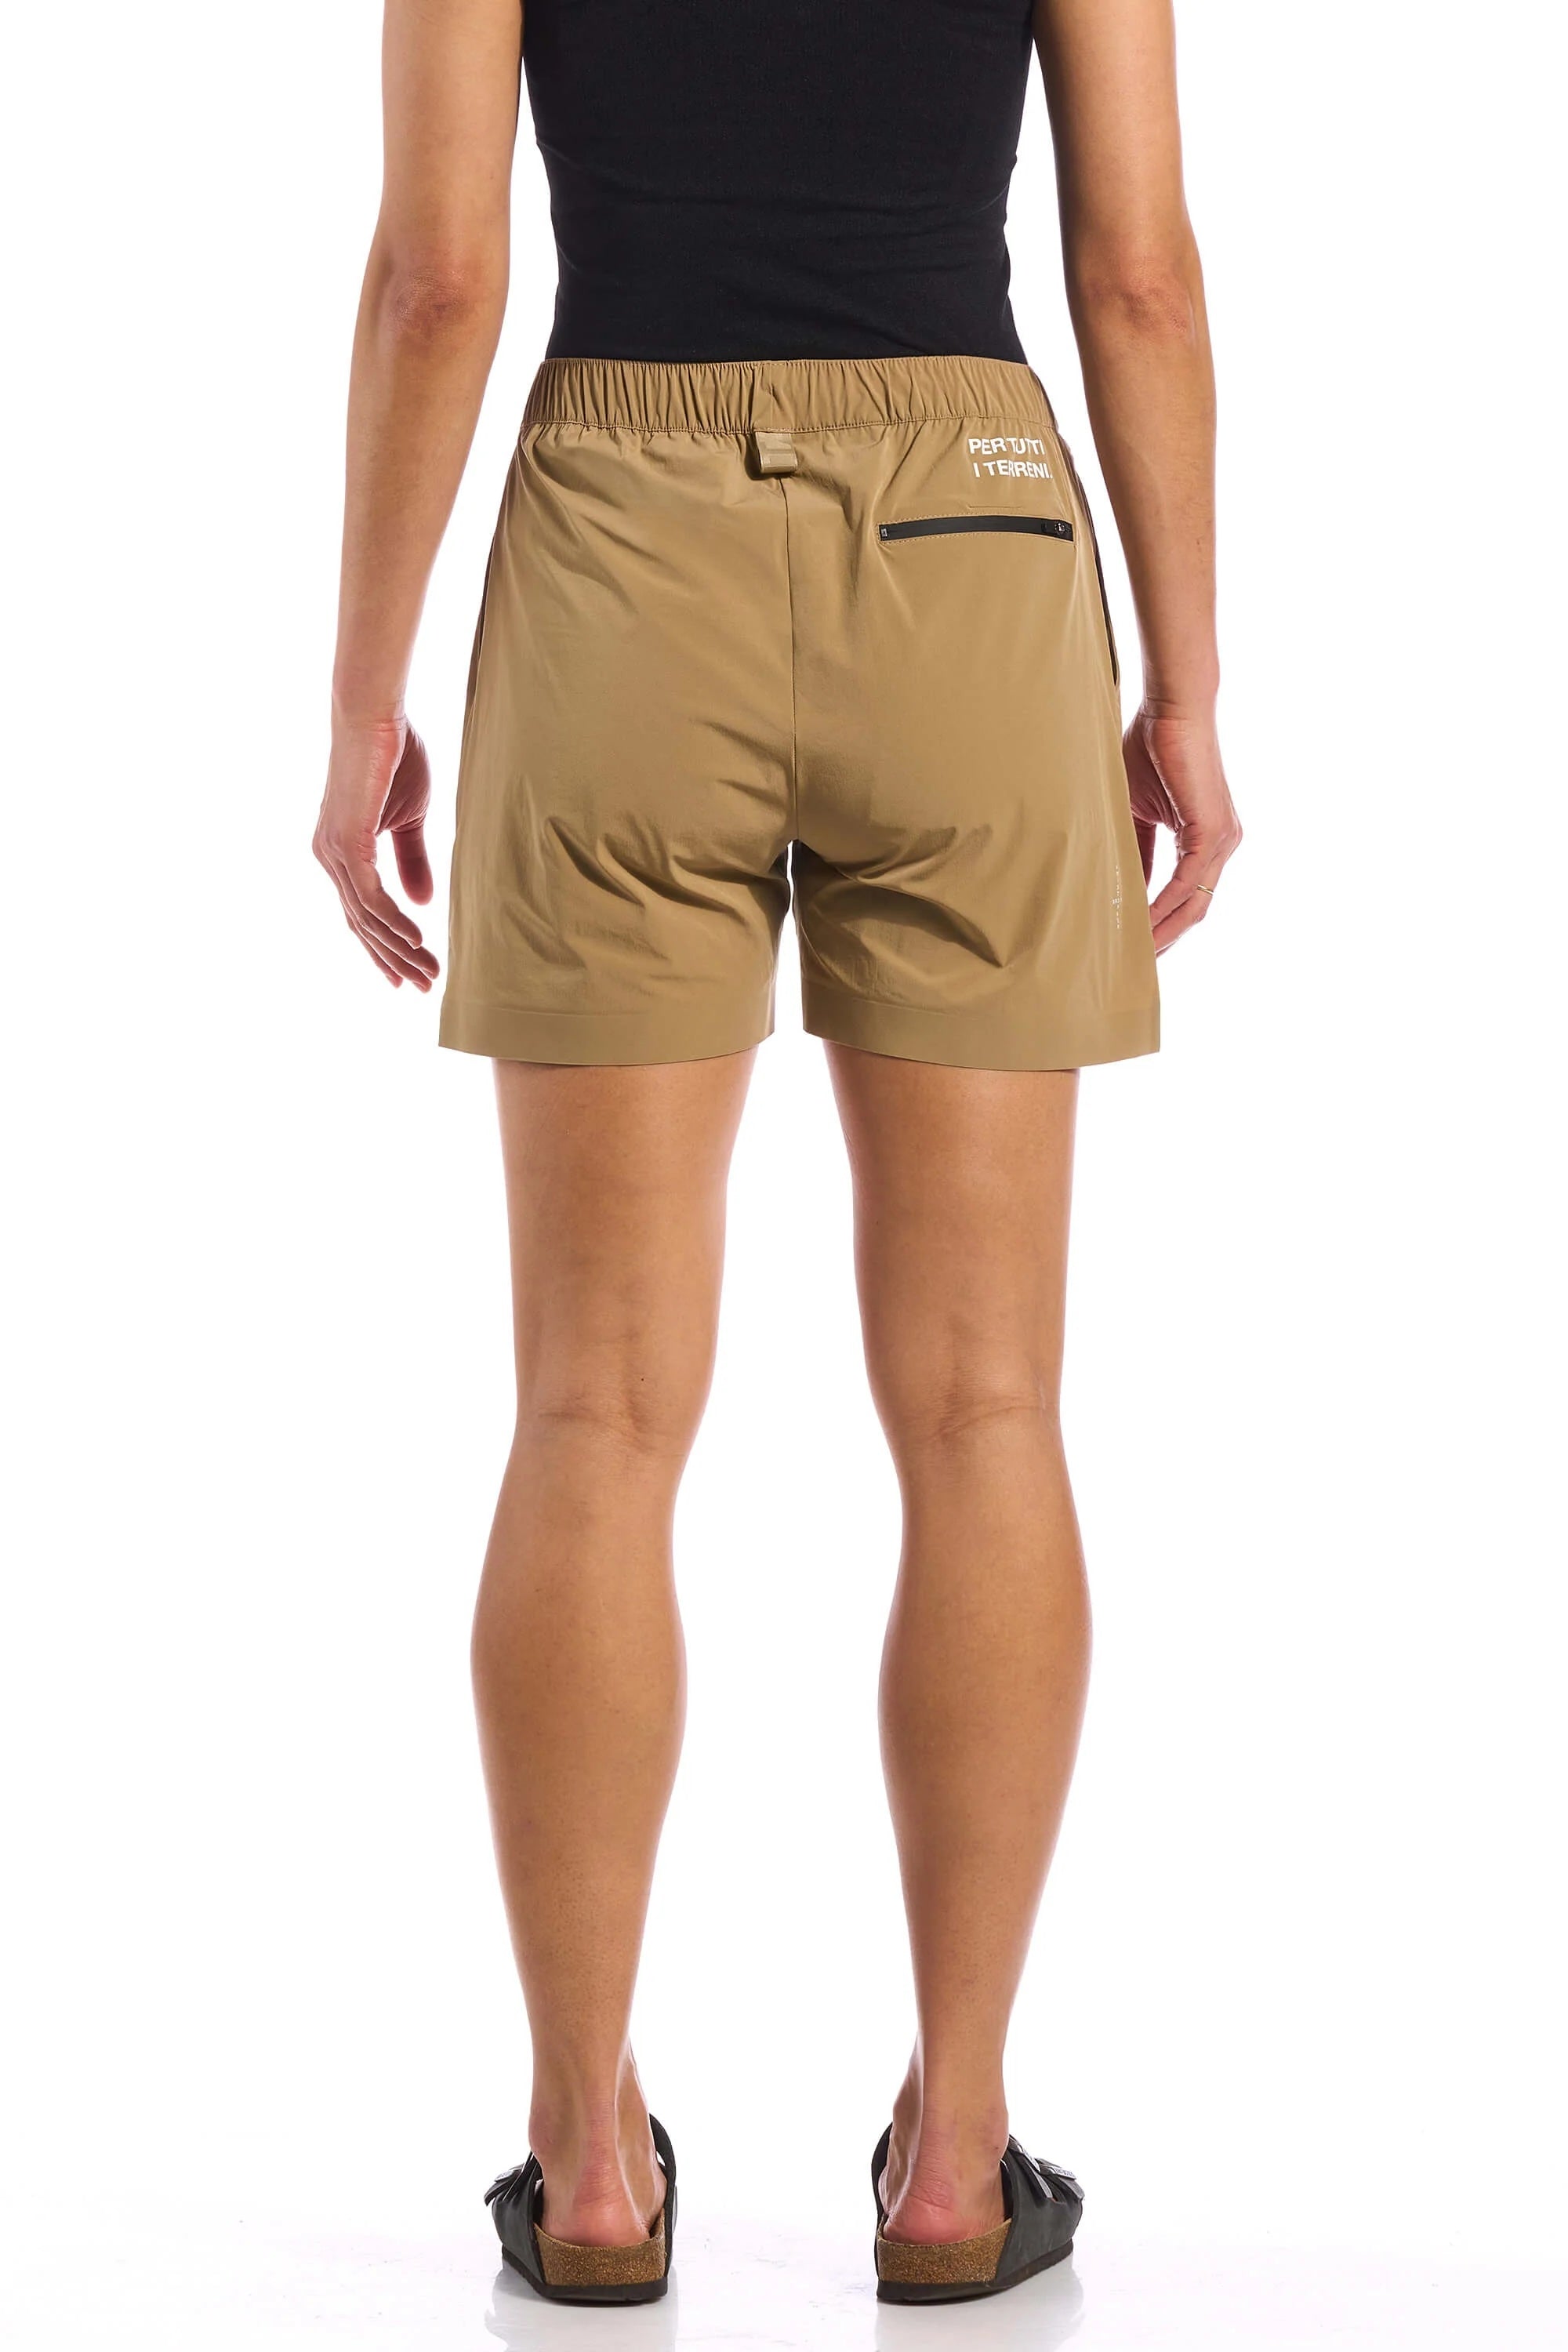 The Active Shorts 6.5"